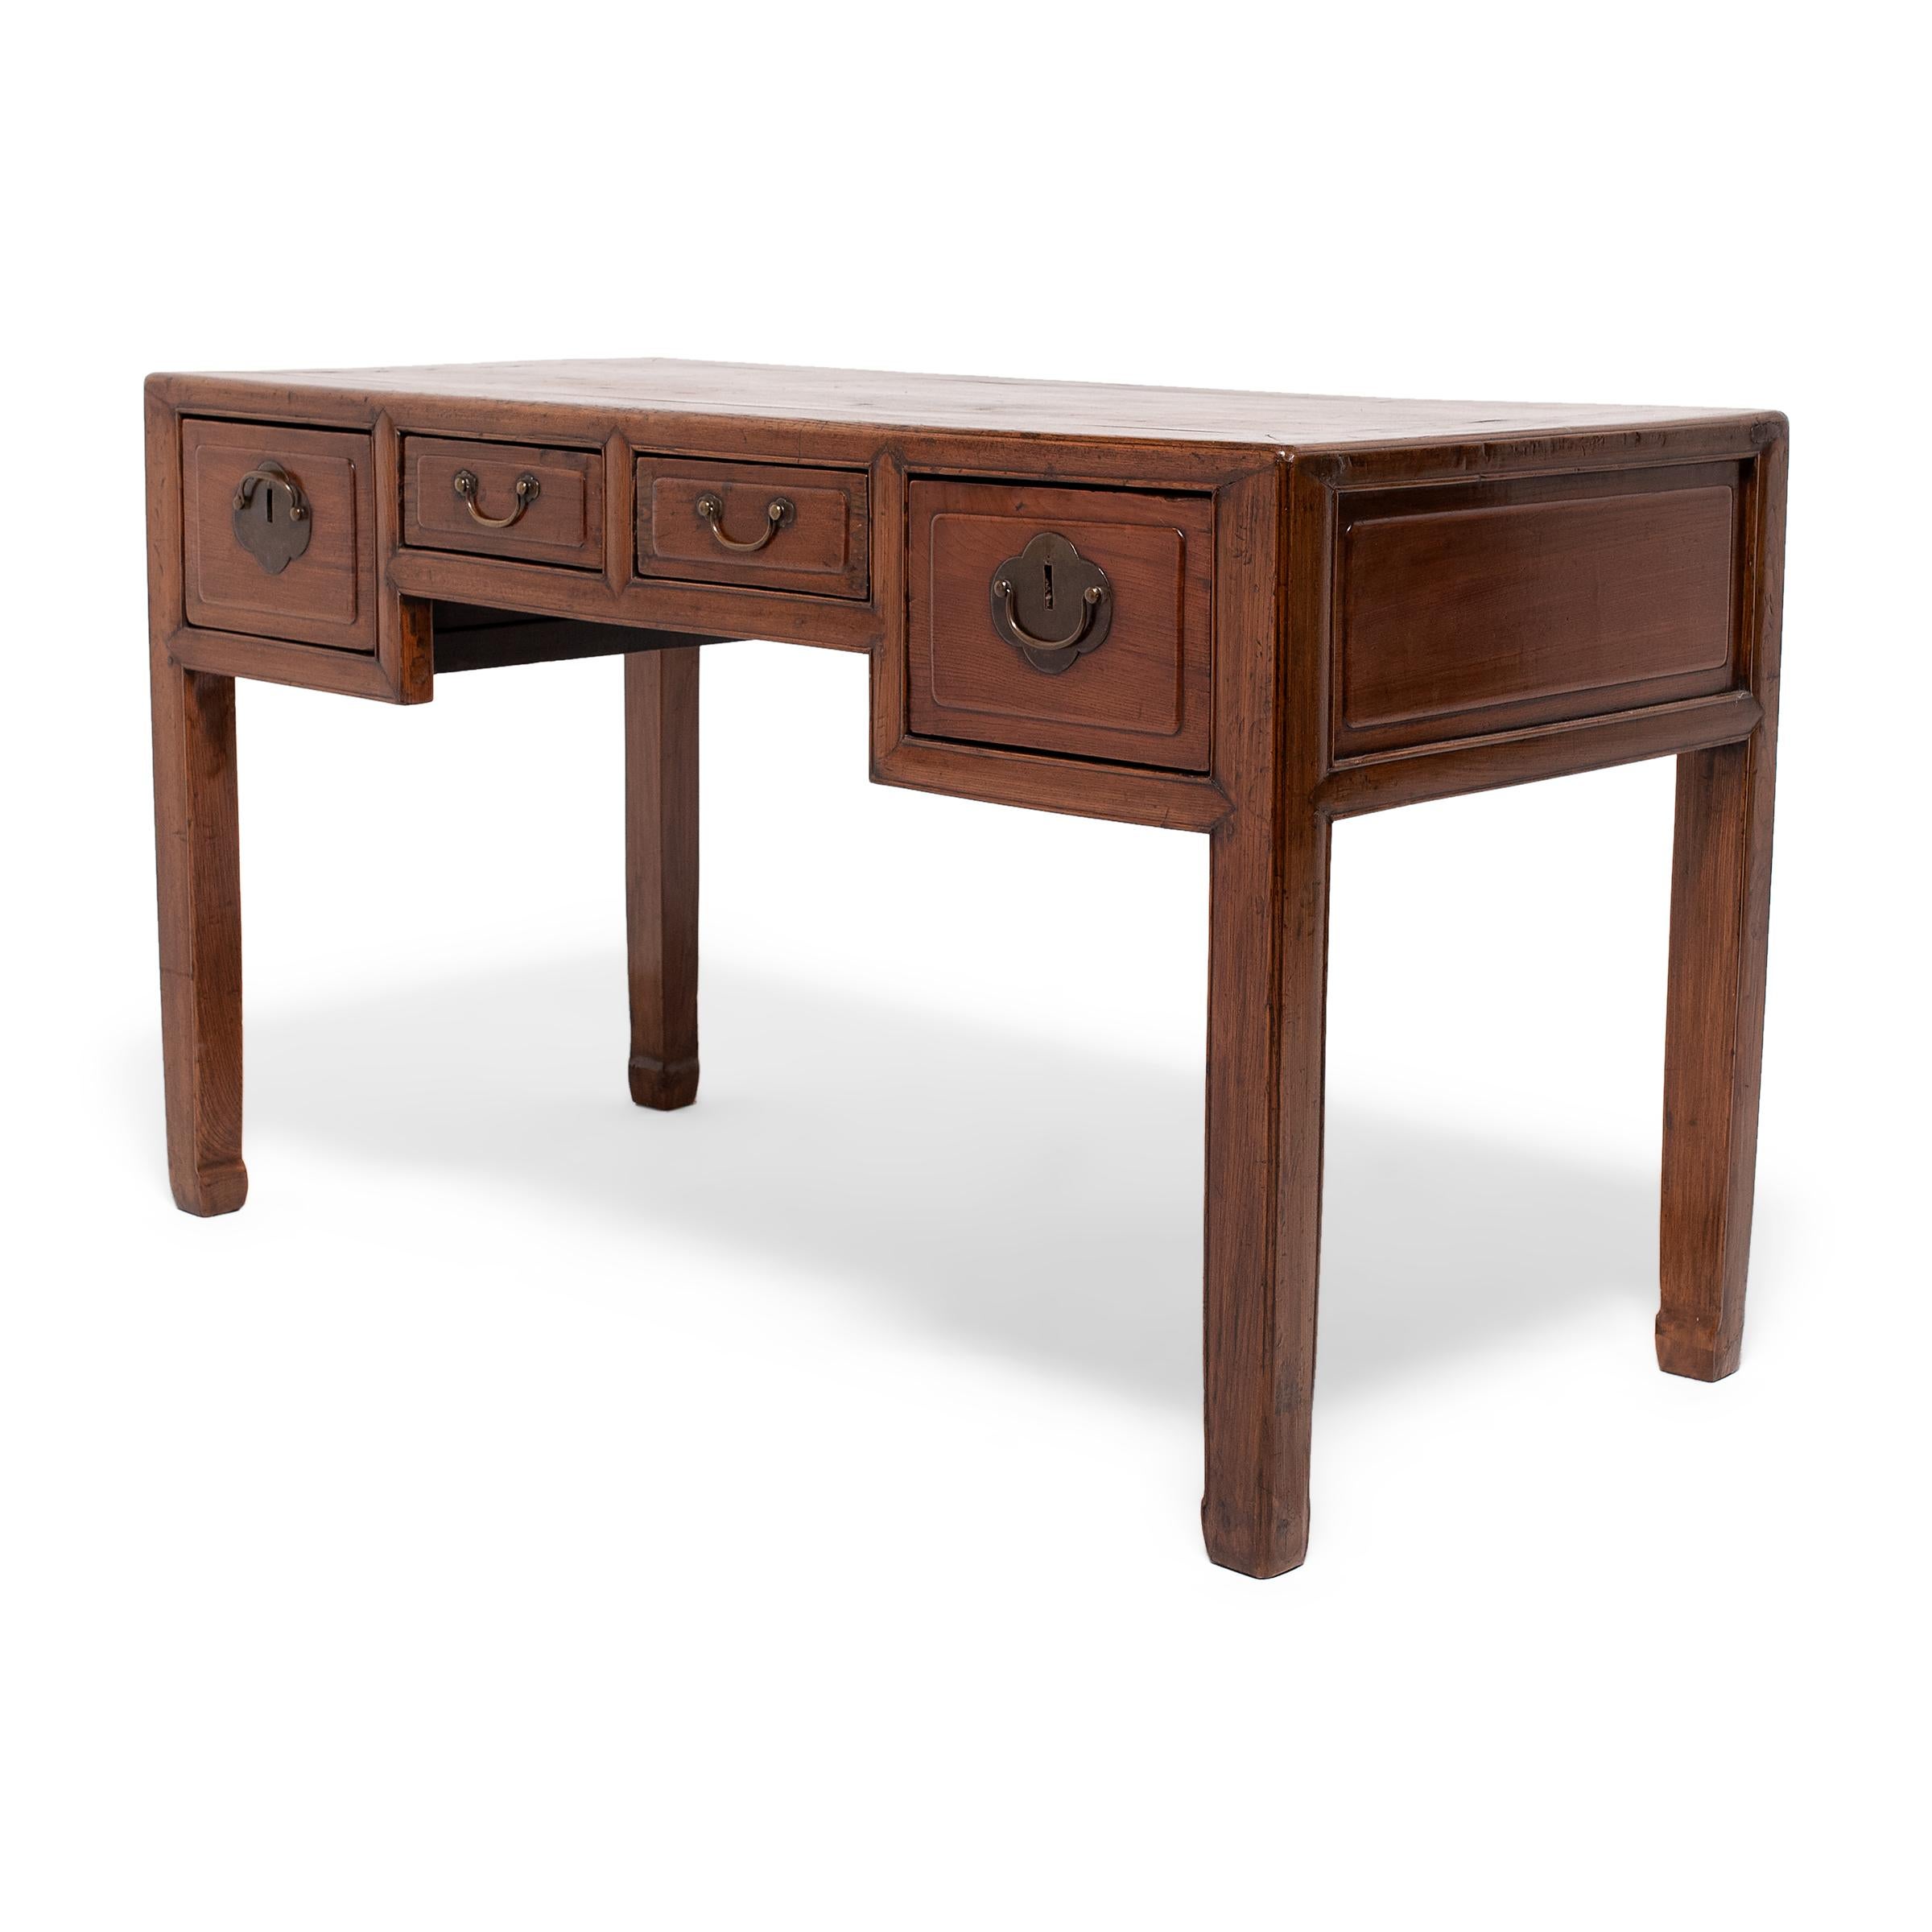 This four-drawer writing desk once stood centerpiece in the office of a well-to-do professional of the late Qing-dynasty. Desks with drawers such as this didn't become popular in China until the 19th century, and were strongly influenced by Western